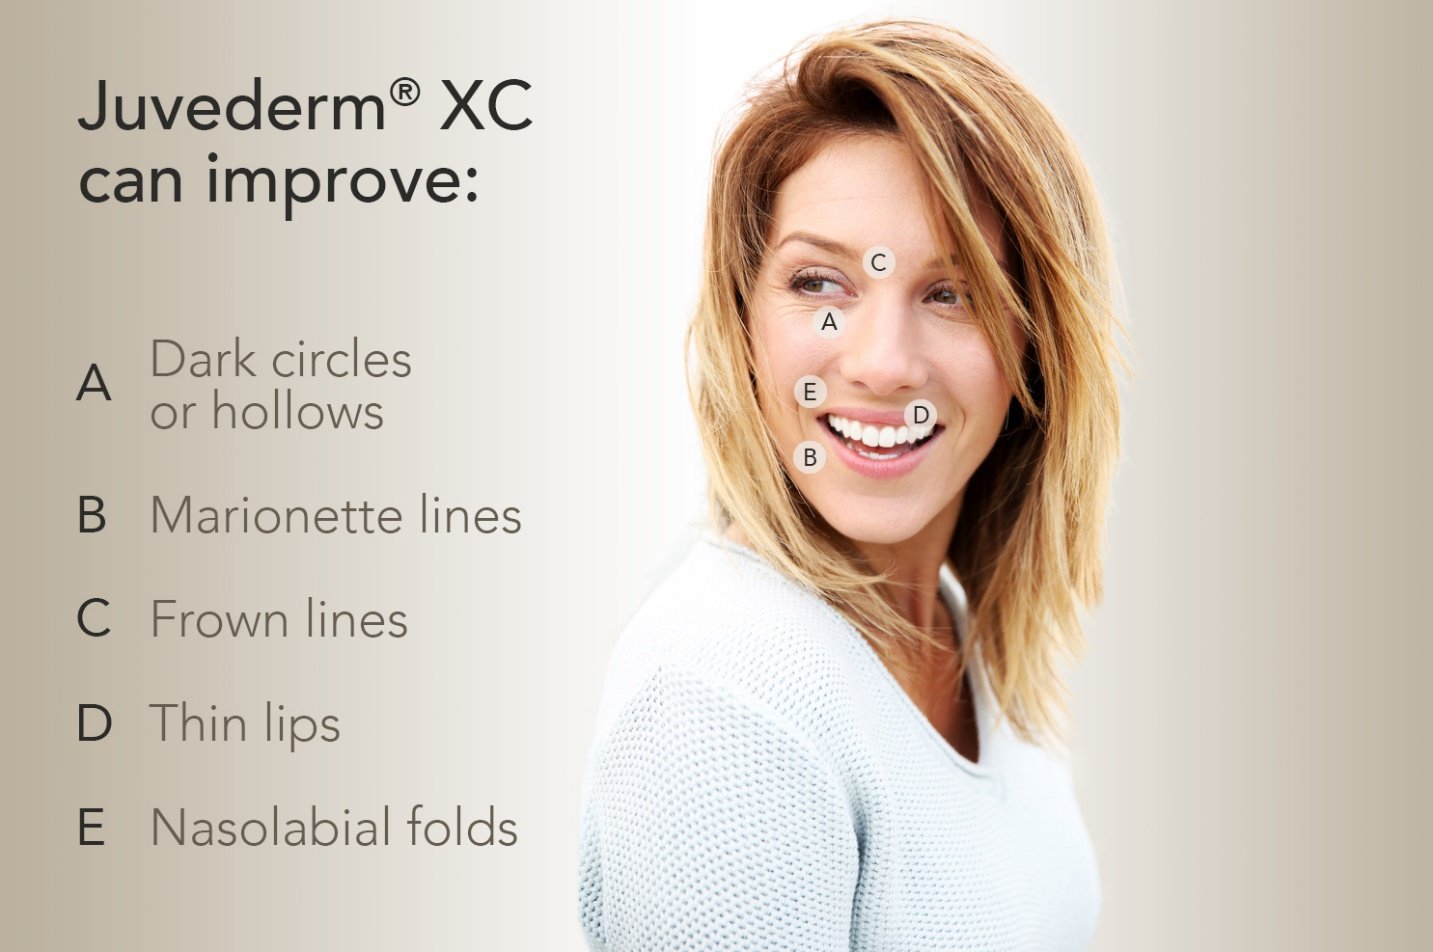 Address multiple concerns with Juvederm in Albuquerque.